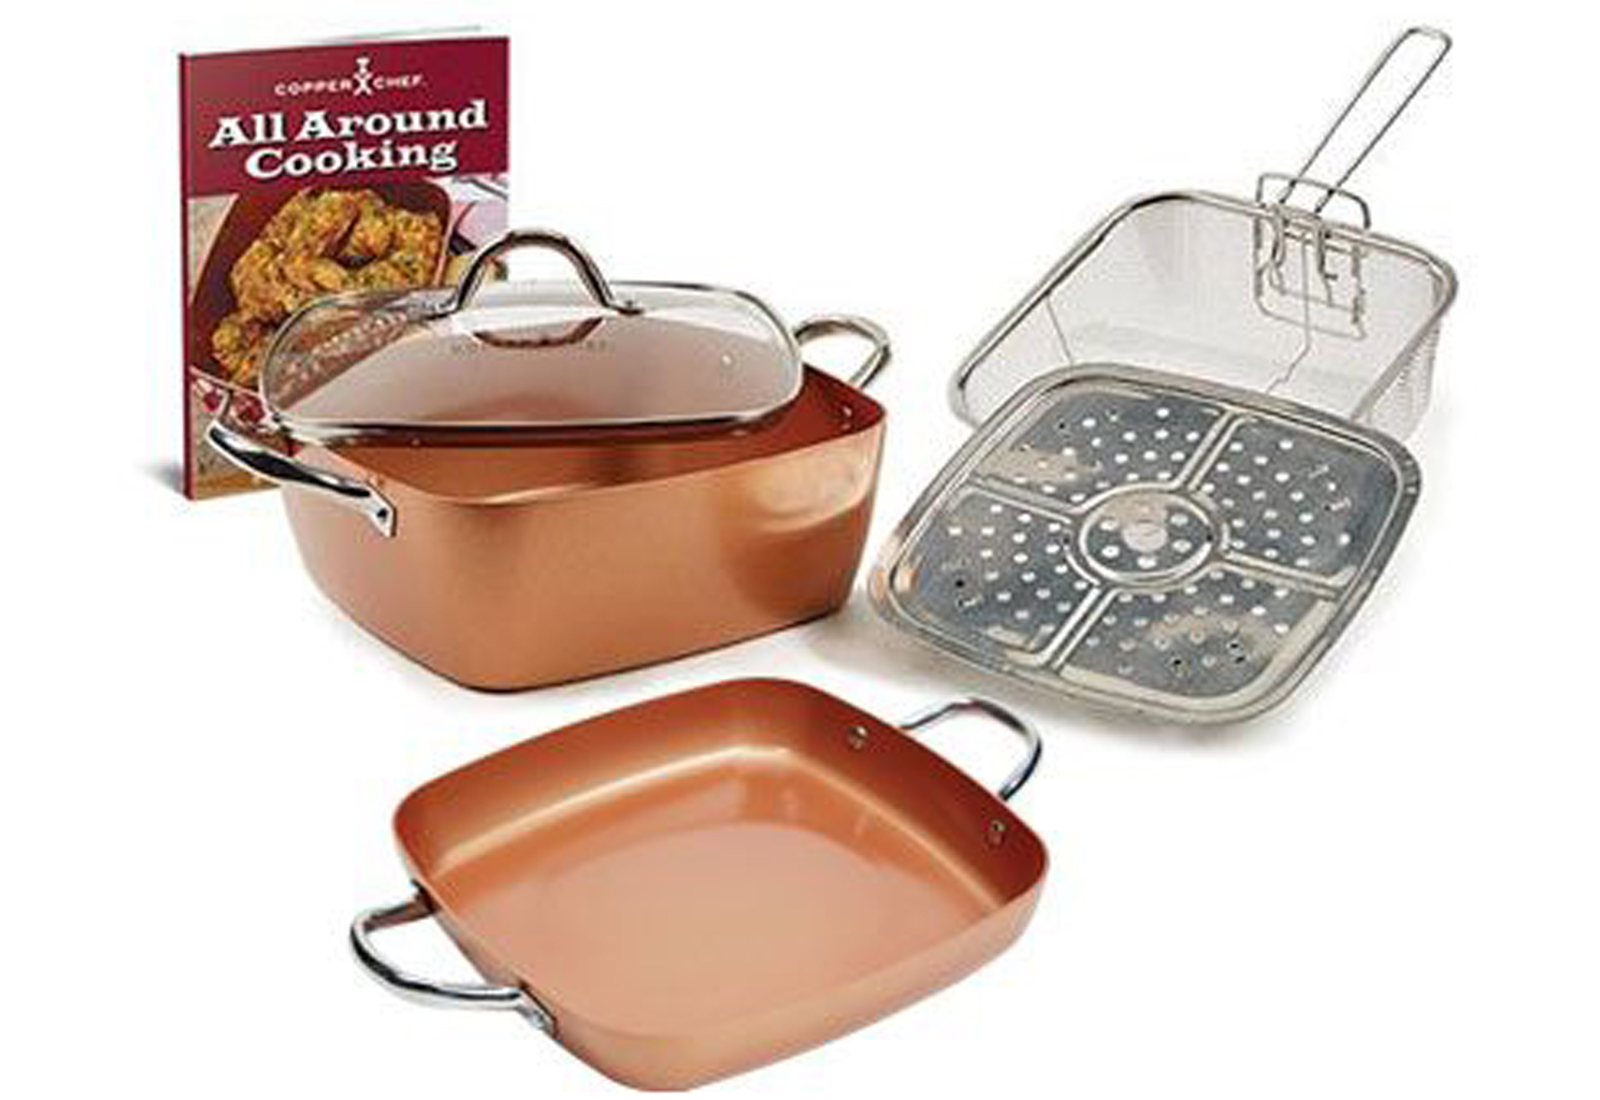 Copper Chef XL 11 In Casserole Pan 6PC Set Product Image